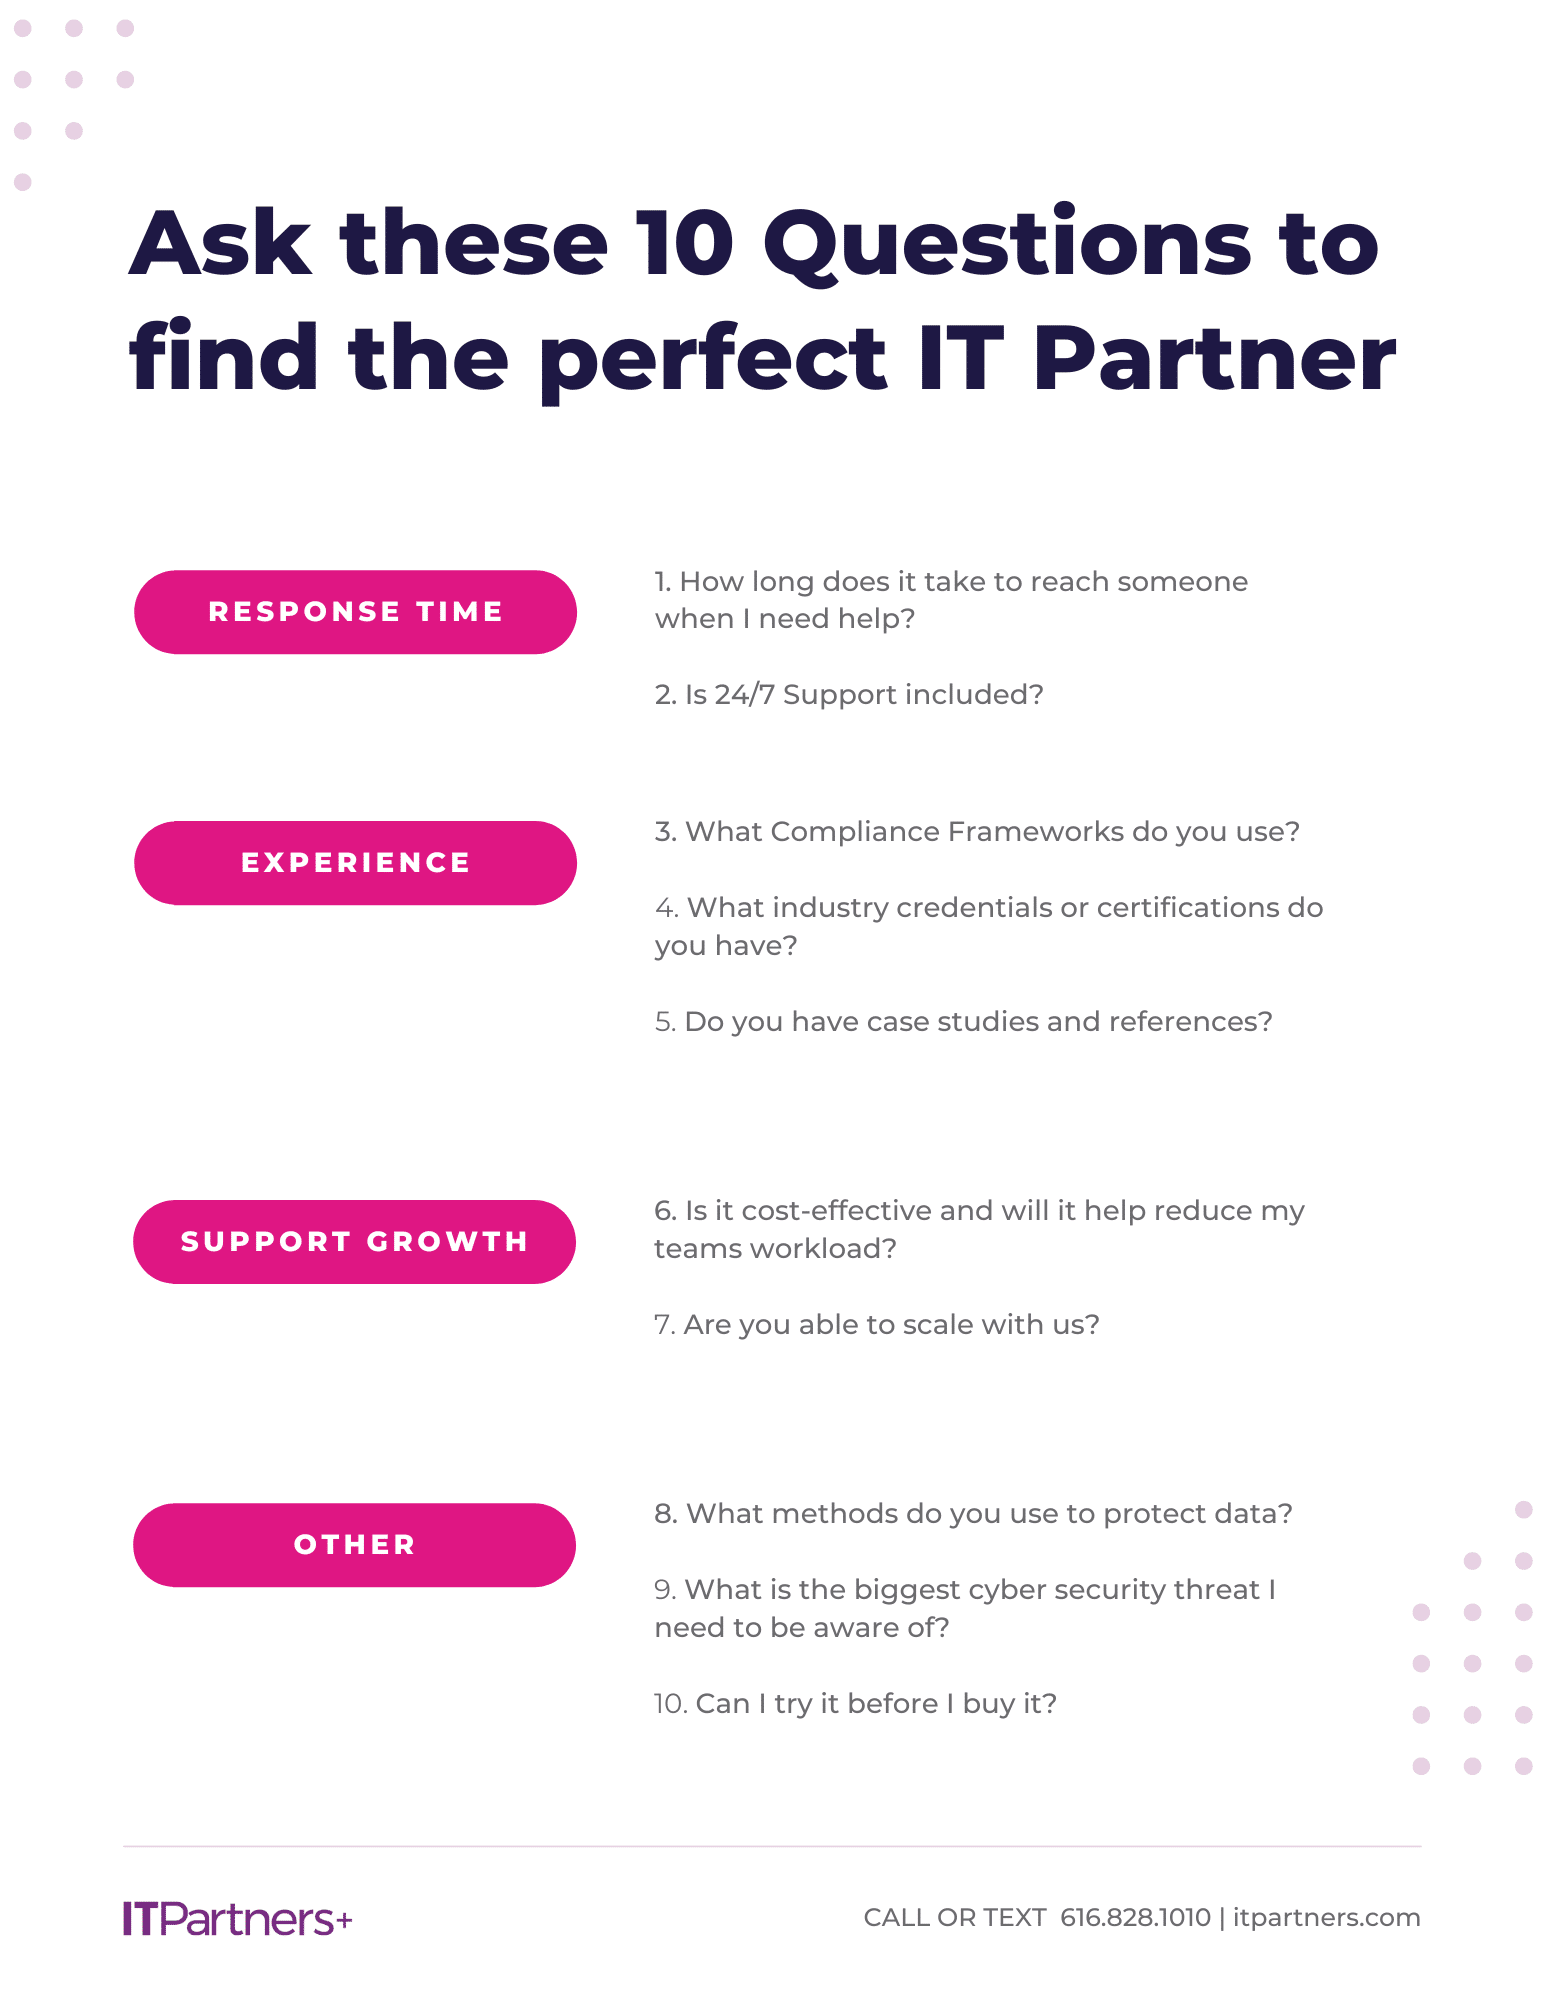 10 Questions To Find The Perfect IT Partner PDF/Image